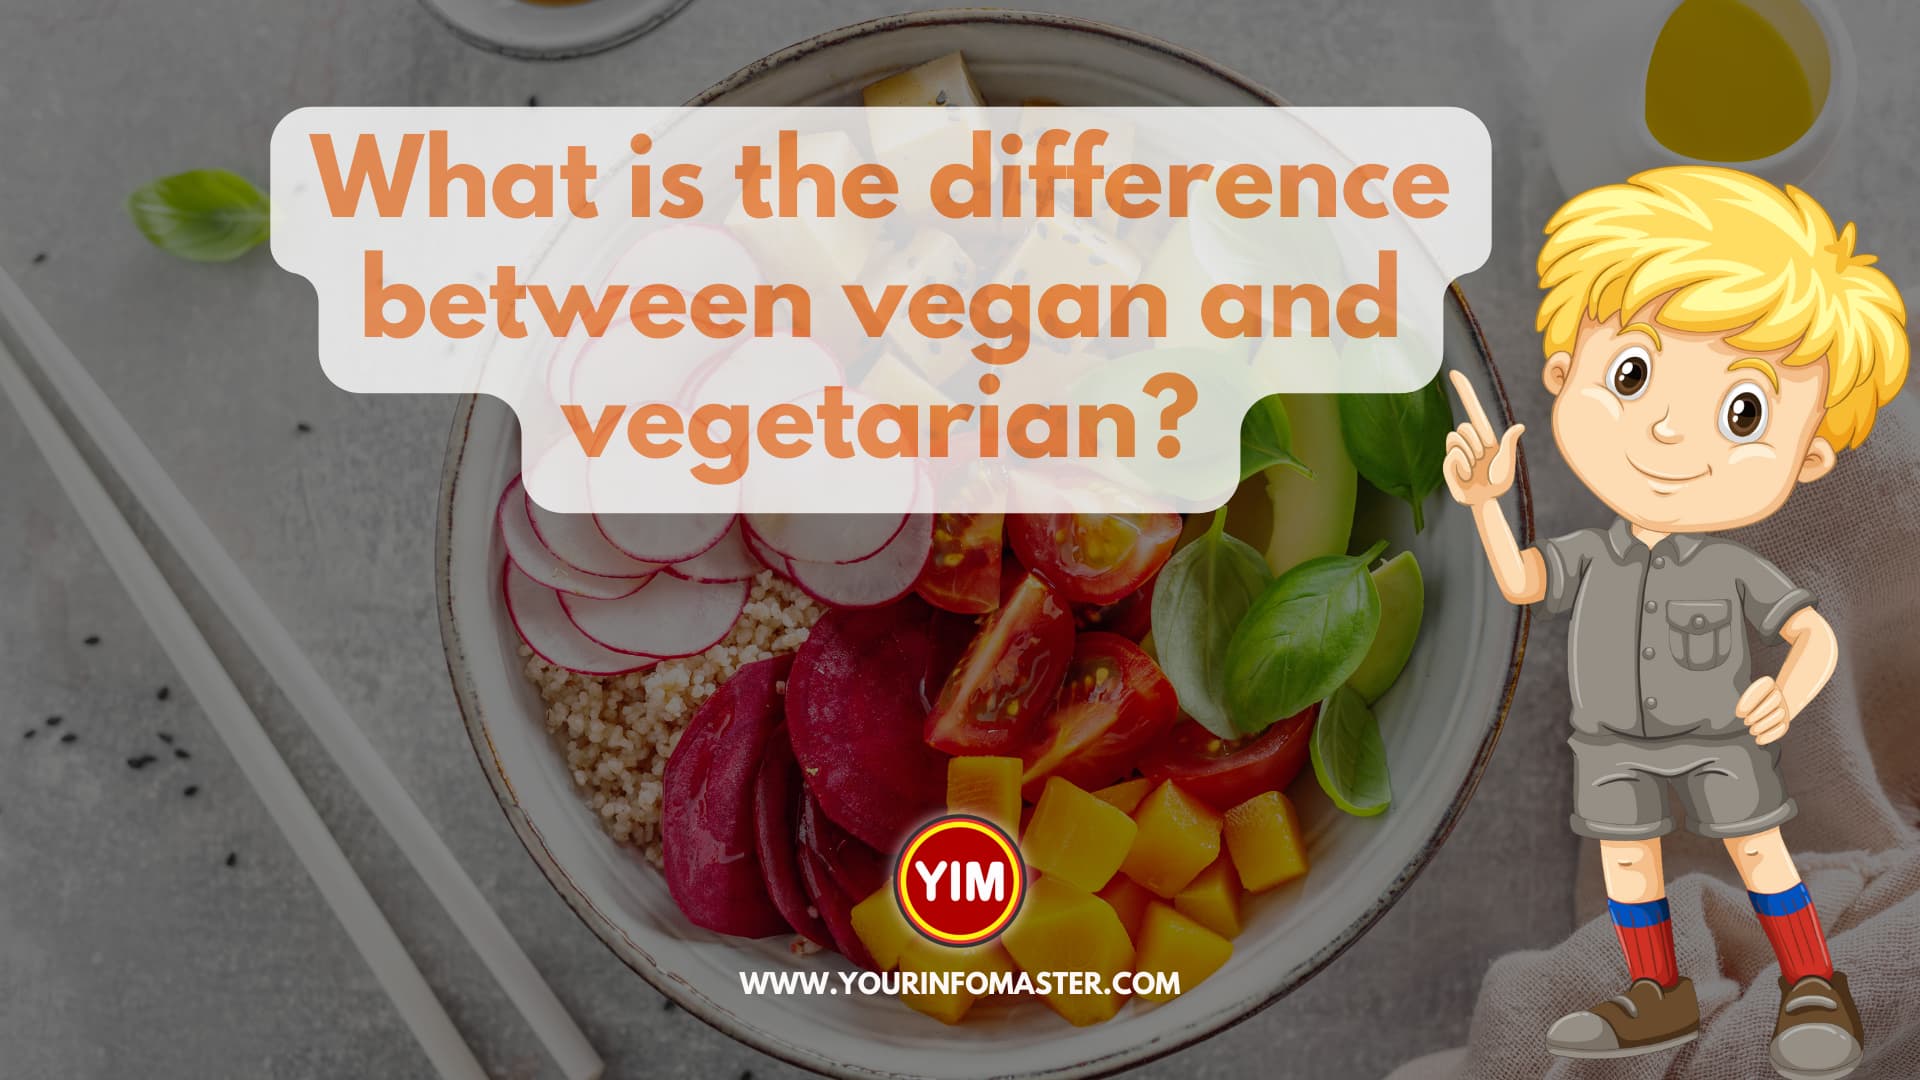 What is the difference between vegan and vegetarian?